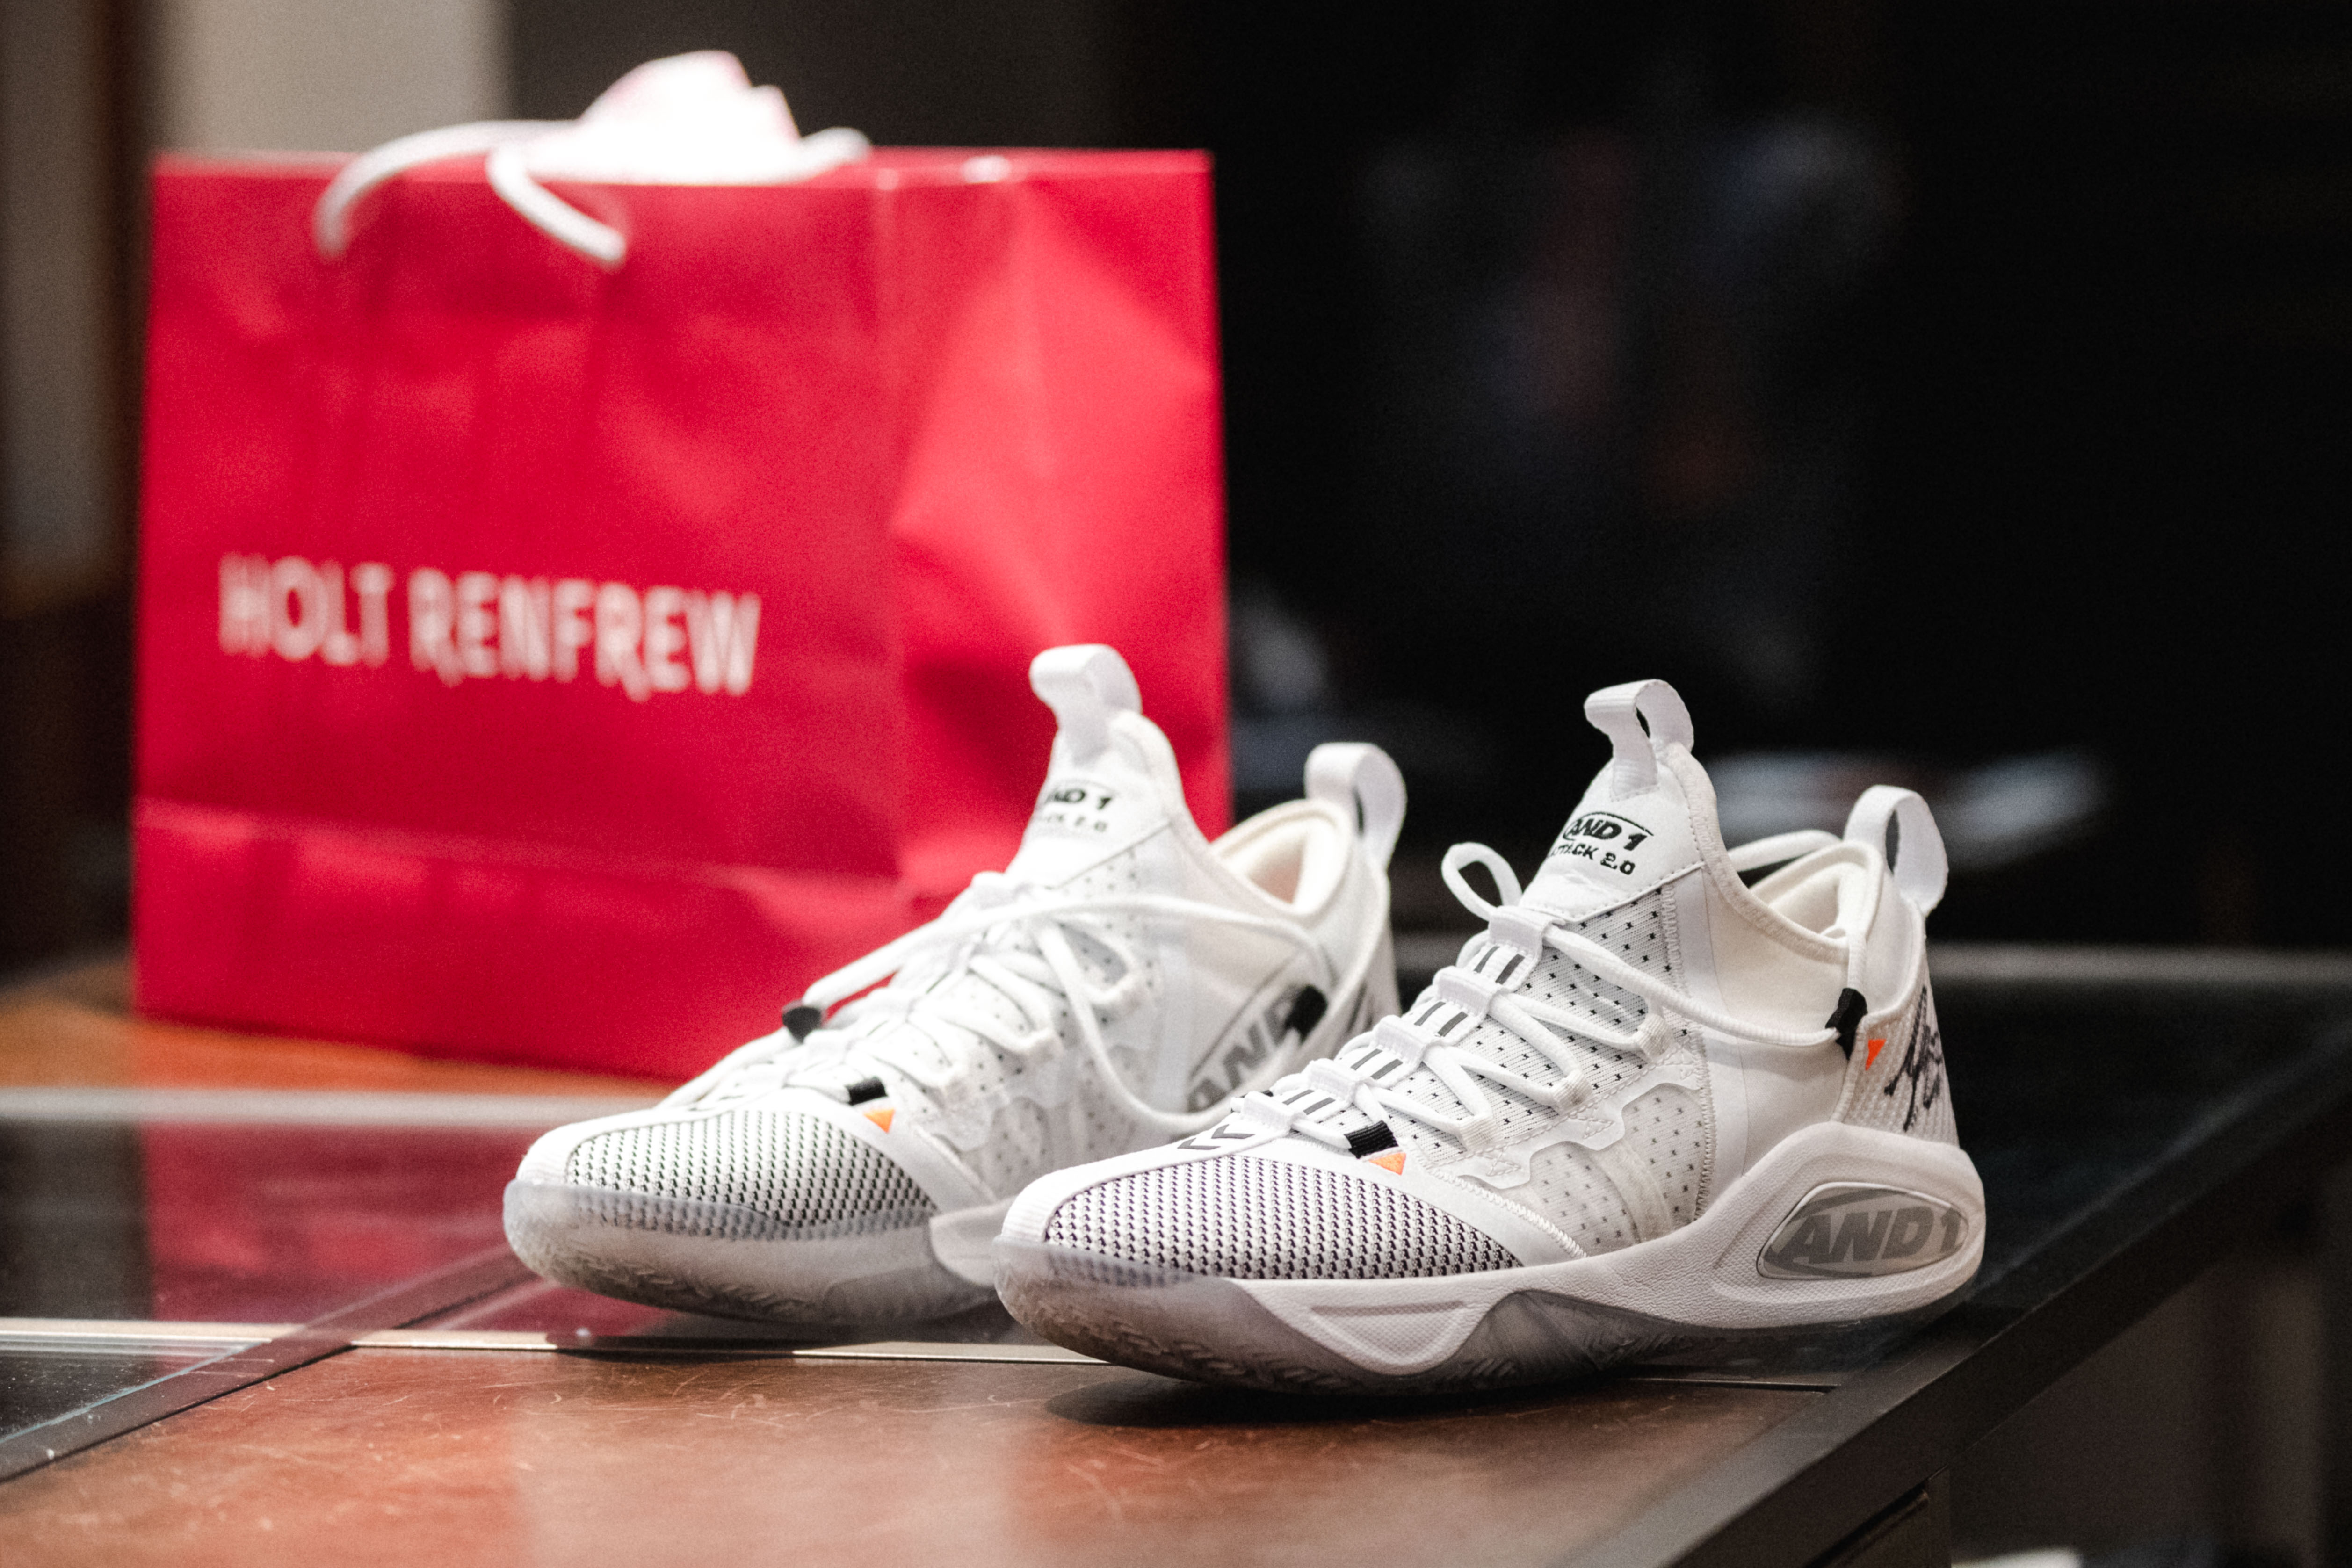 Win Fred Van Vleet's shoes with Avec Classe – Serge Ibaka Foundation